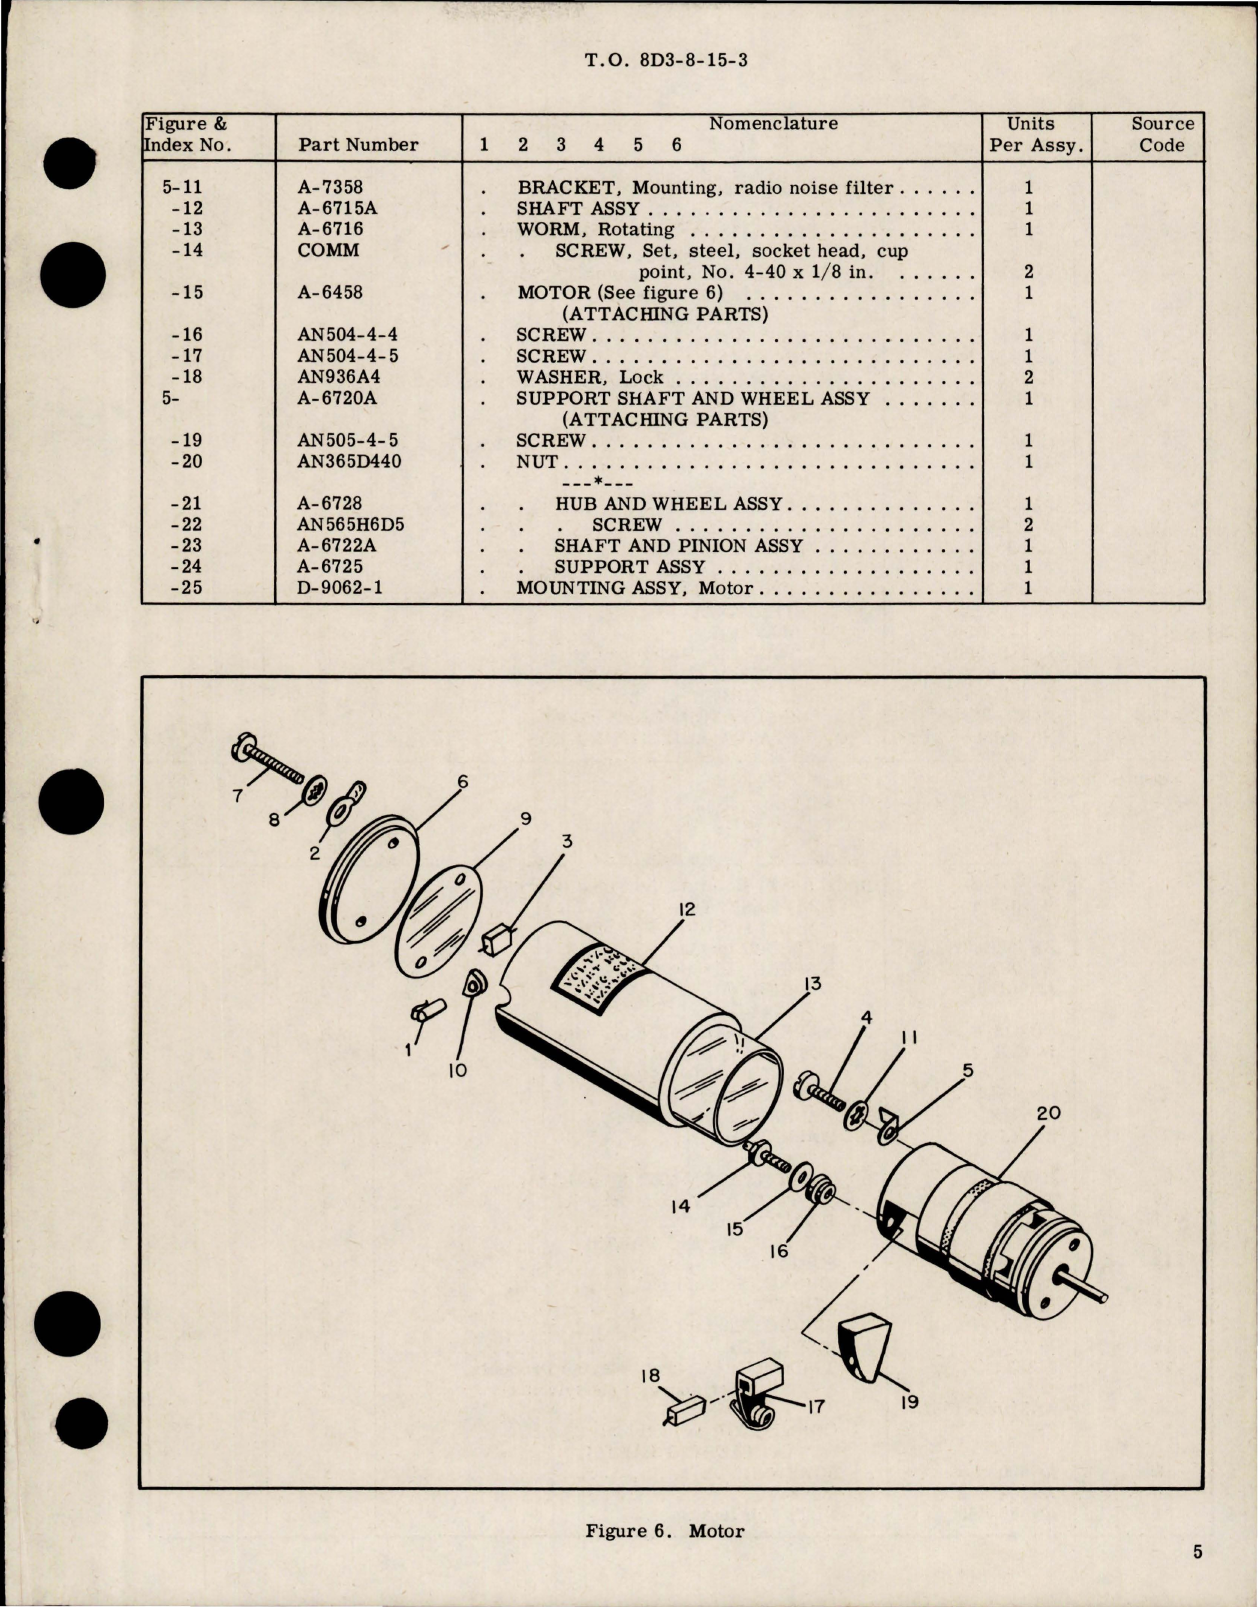 Sample page 5 from AirCorps Library document: Overhaul Instructions with Parts for Rotating Warning Navigational Light - Part G-6965-6 